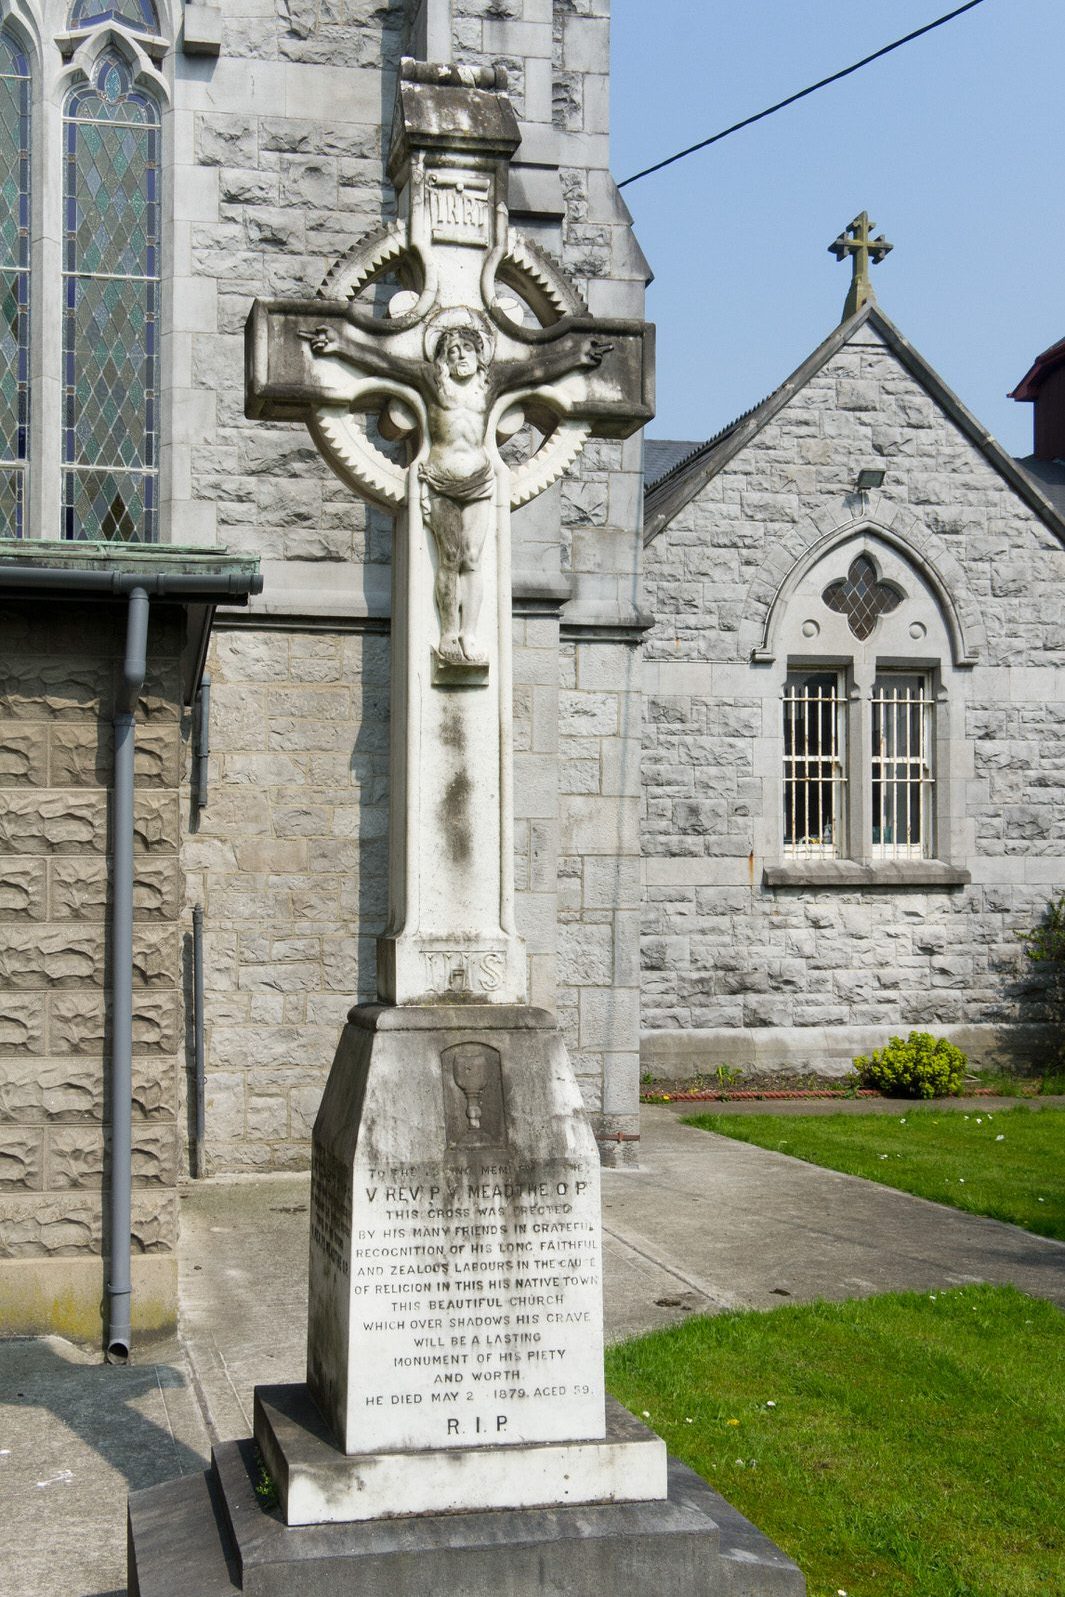 FR MEADTHE MEMORIAL CROSS AT THE DOMINICAN CHURCH IN DROGHEDA [PHOTOGRAPHED 18 APRIL 2011 BEFORE THE CHURCH BECAME INACTIVE]